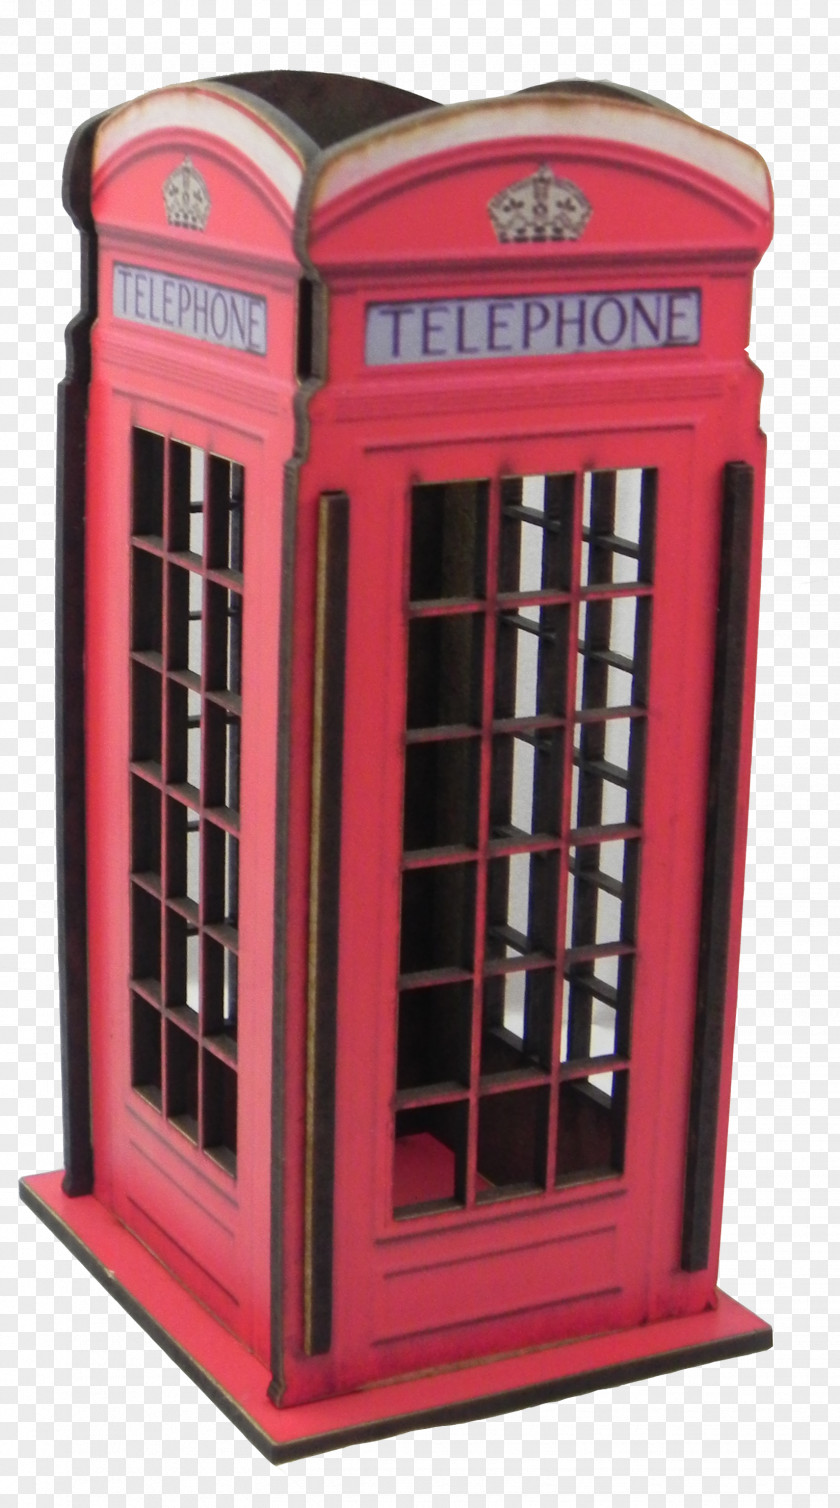 London Phone Payphone Telephone Booth Interior Design Services PNG